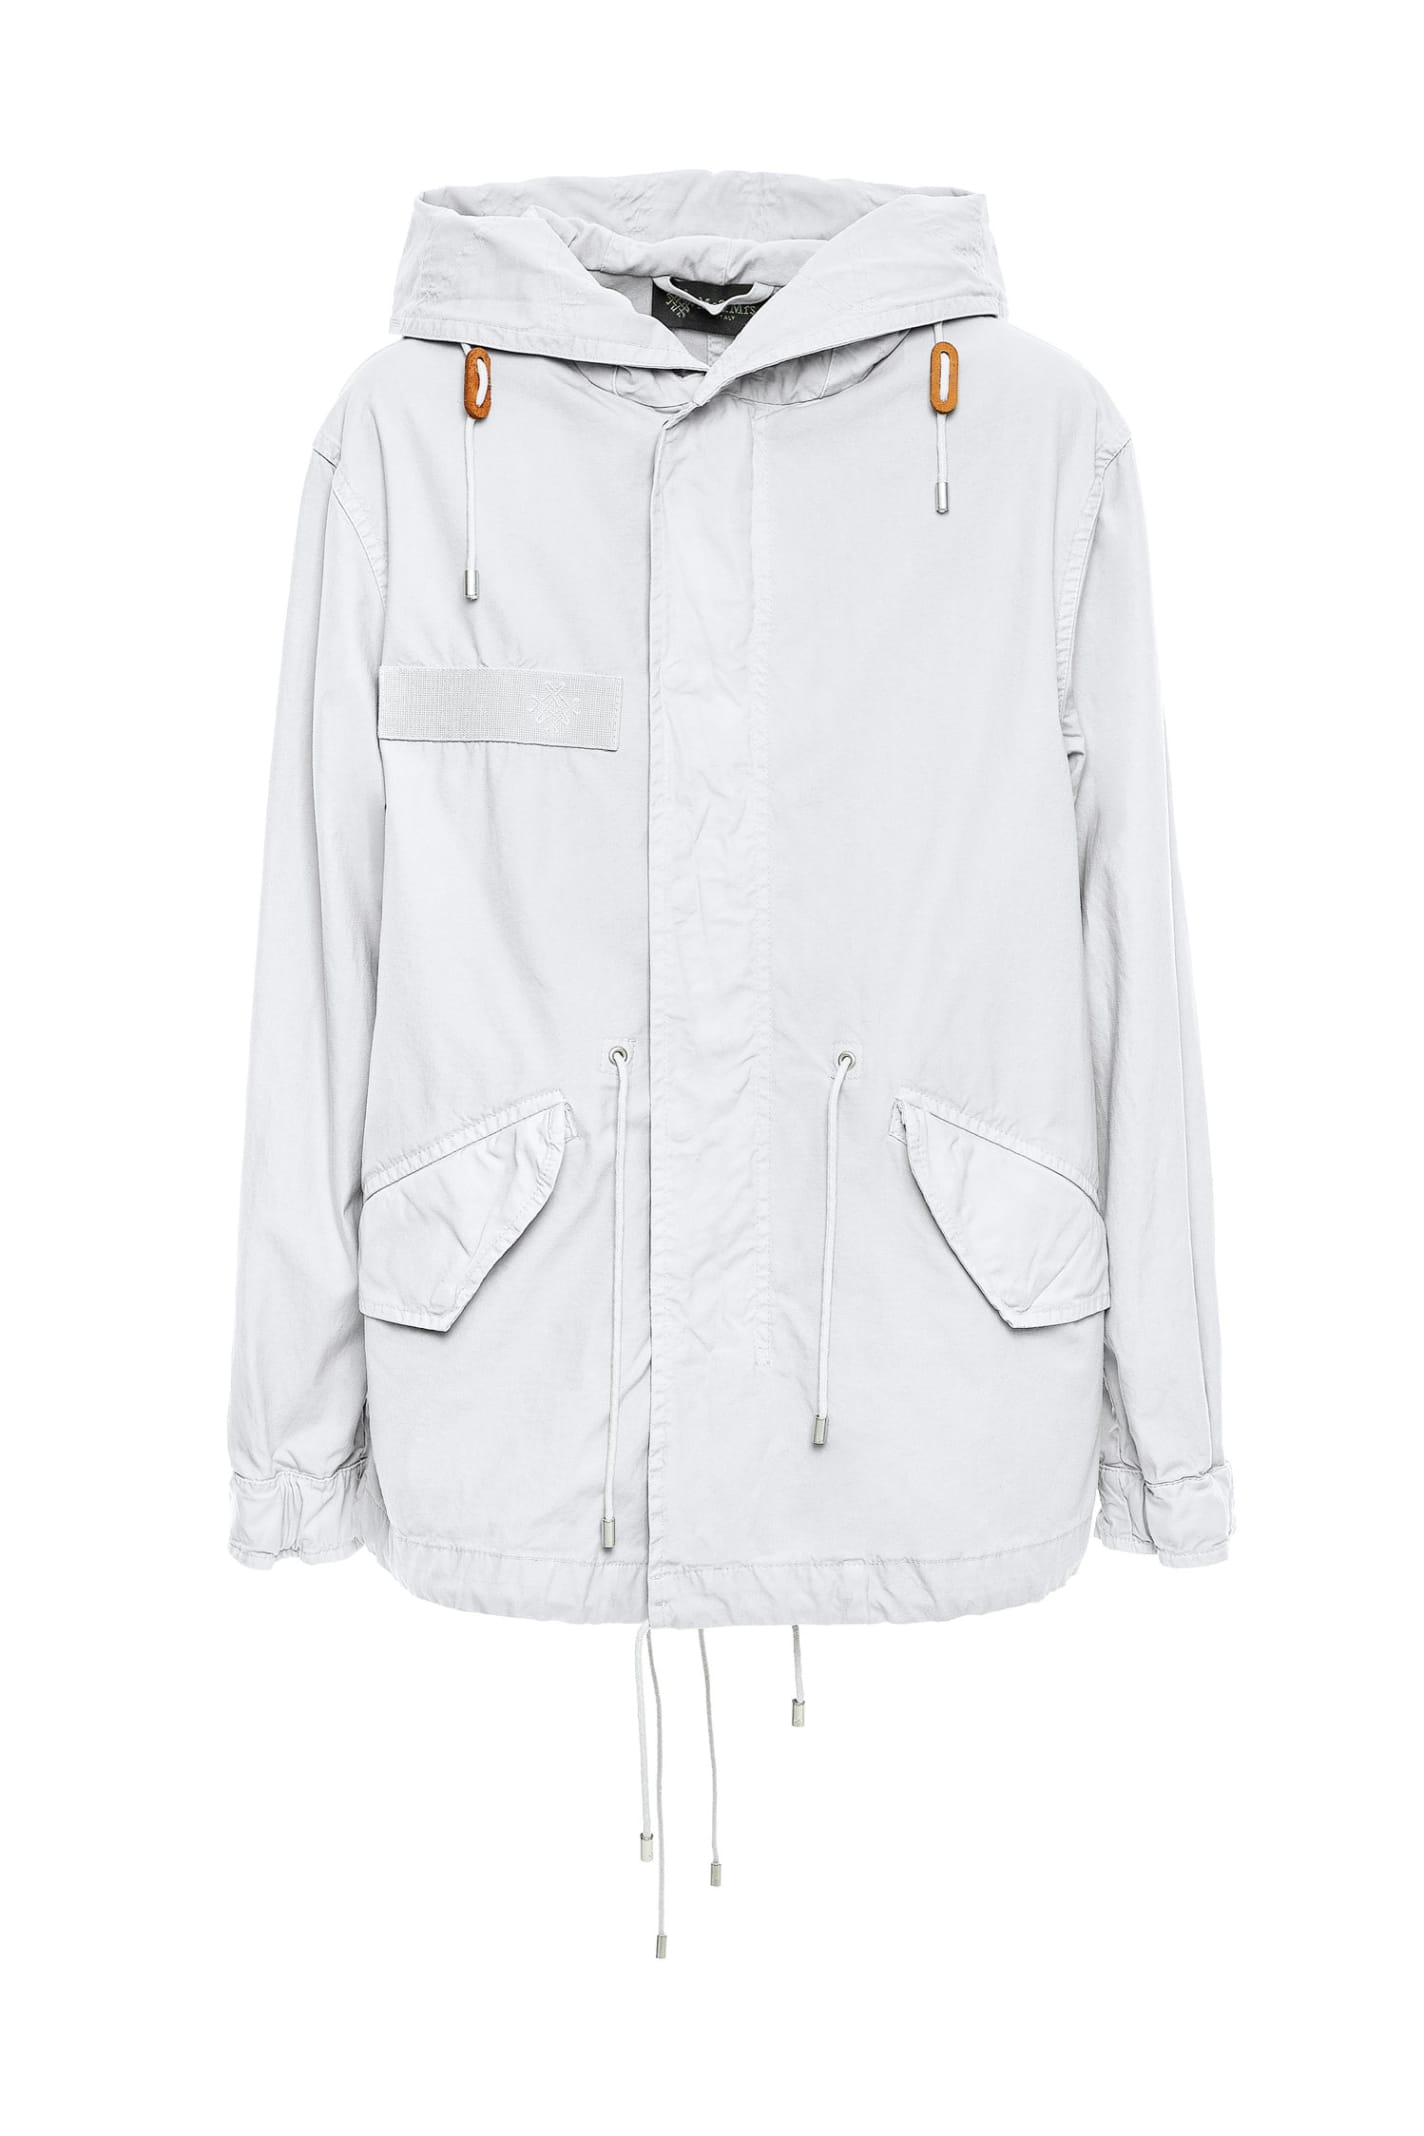 Mr & Mrs Italy Jazzy Mini Parka For Woman